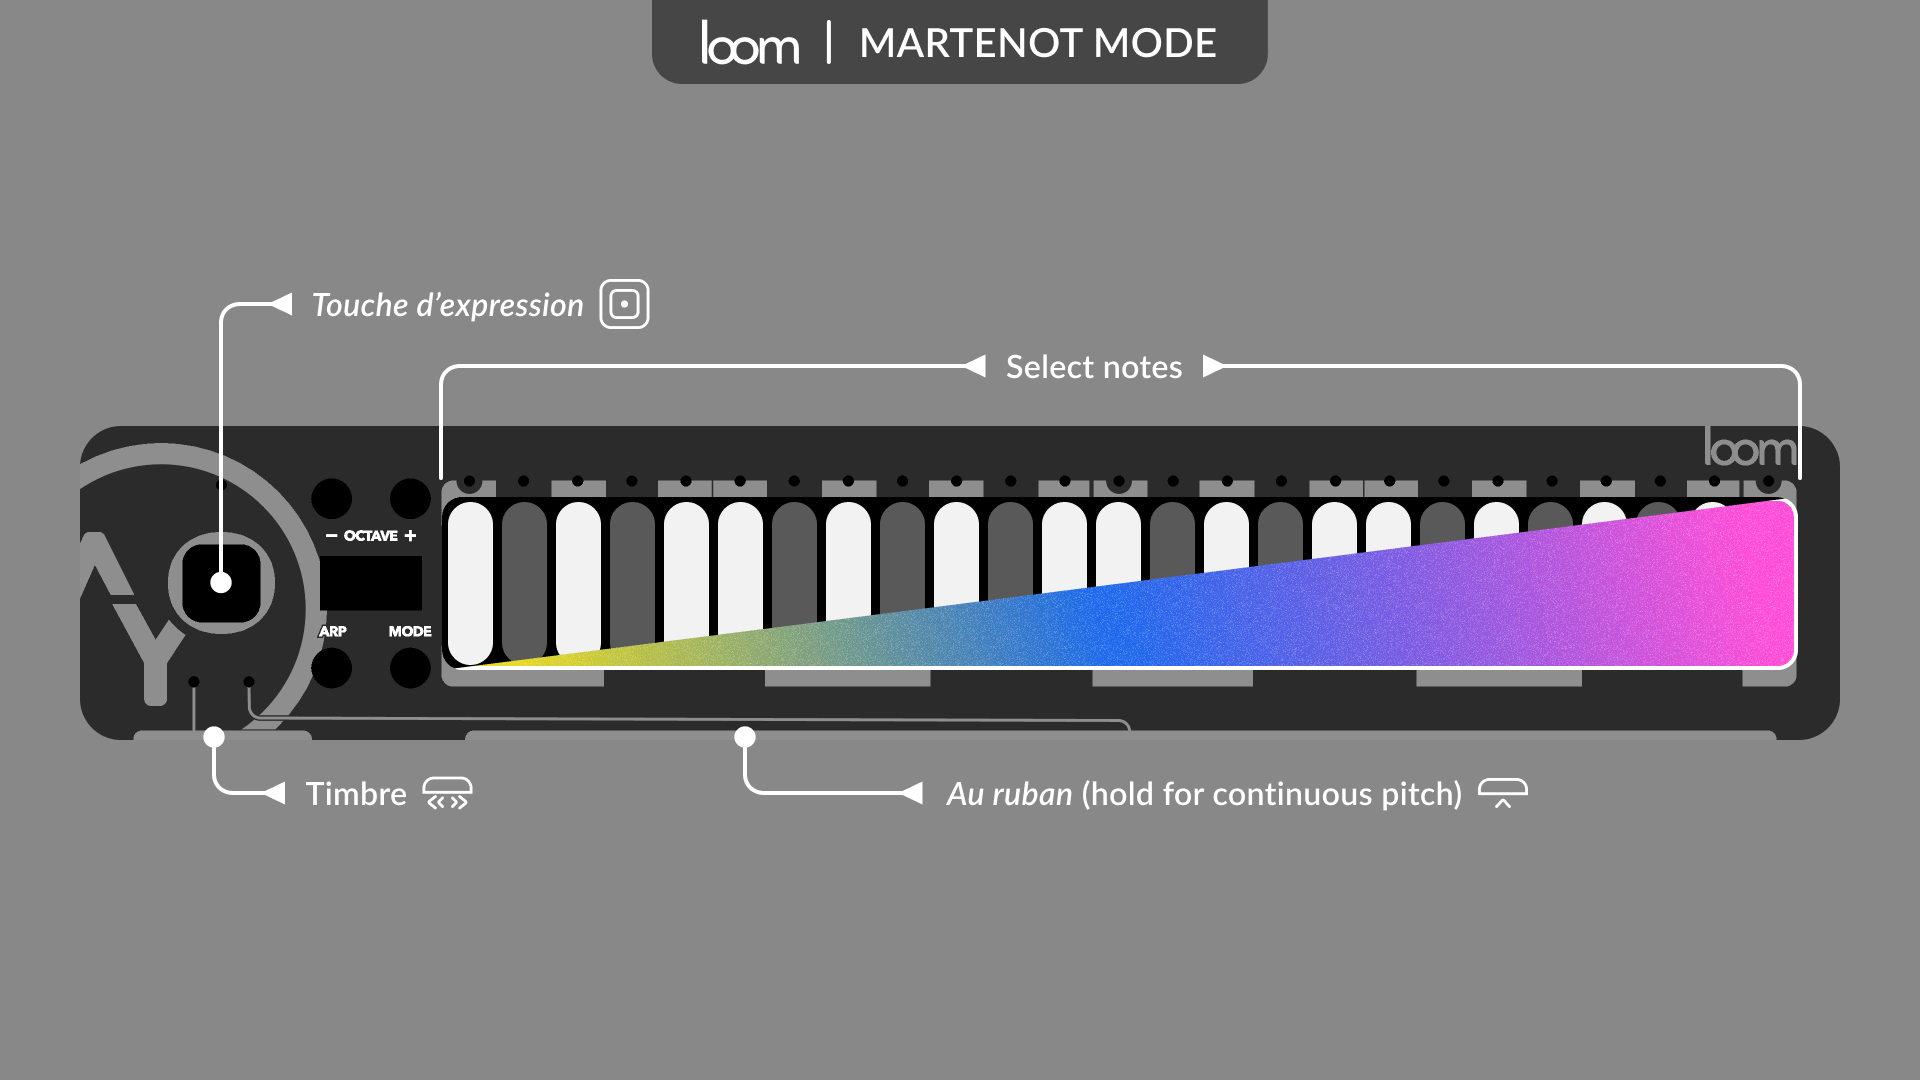 Martenot mode: a playing mode inspired from the Ondes Martenot instrument.